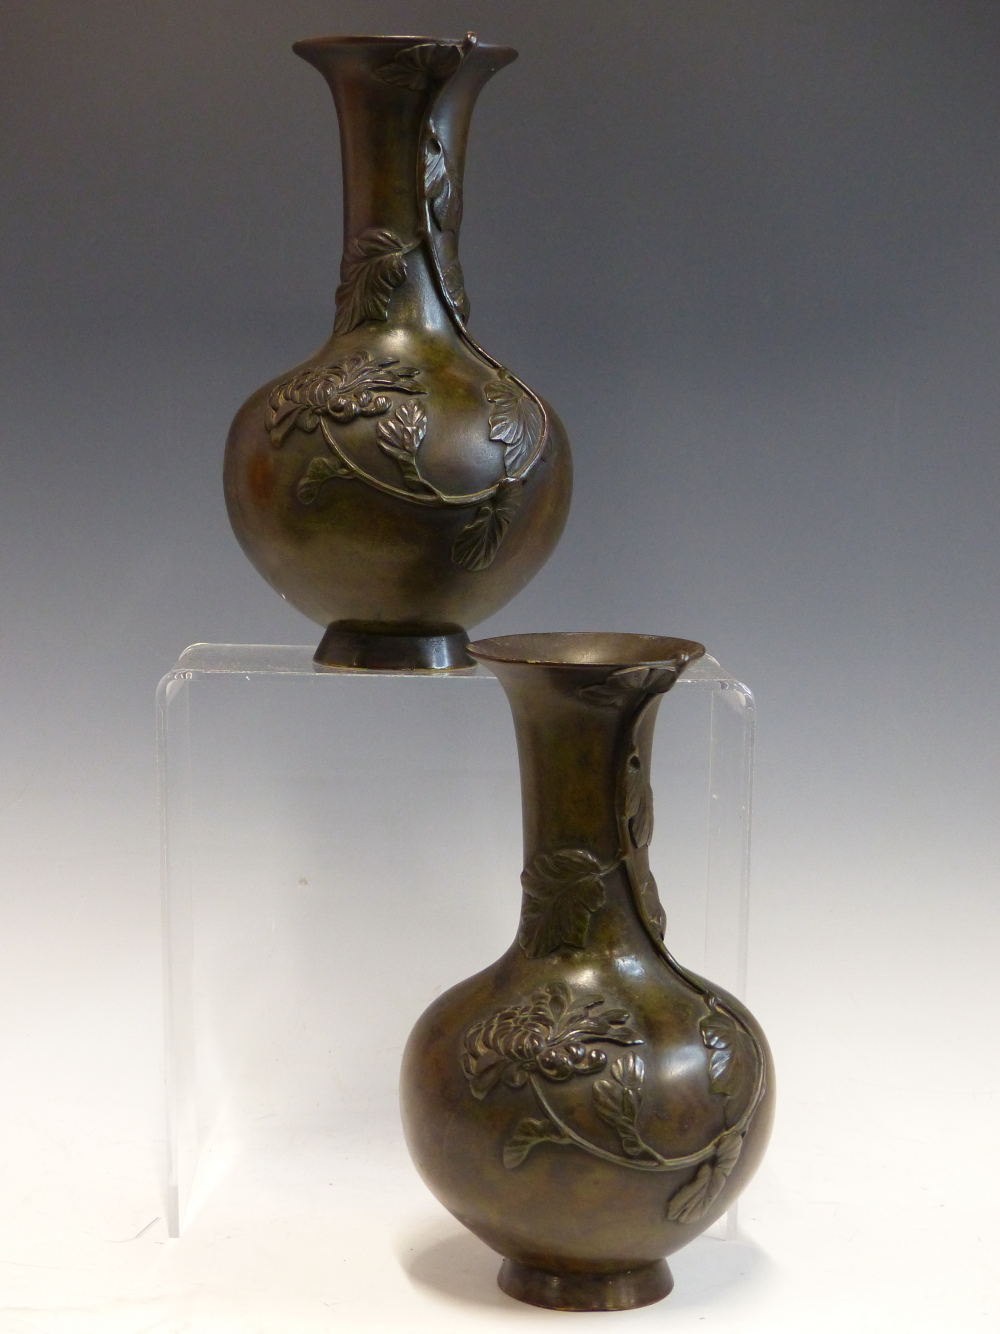 A PAIR IF EARLY 20th C. JAPANESE BRONZE BOTTLE SHAPED VASES CAST WITH STEMS OF CHRYSANTHEMUMS